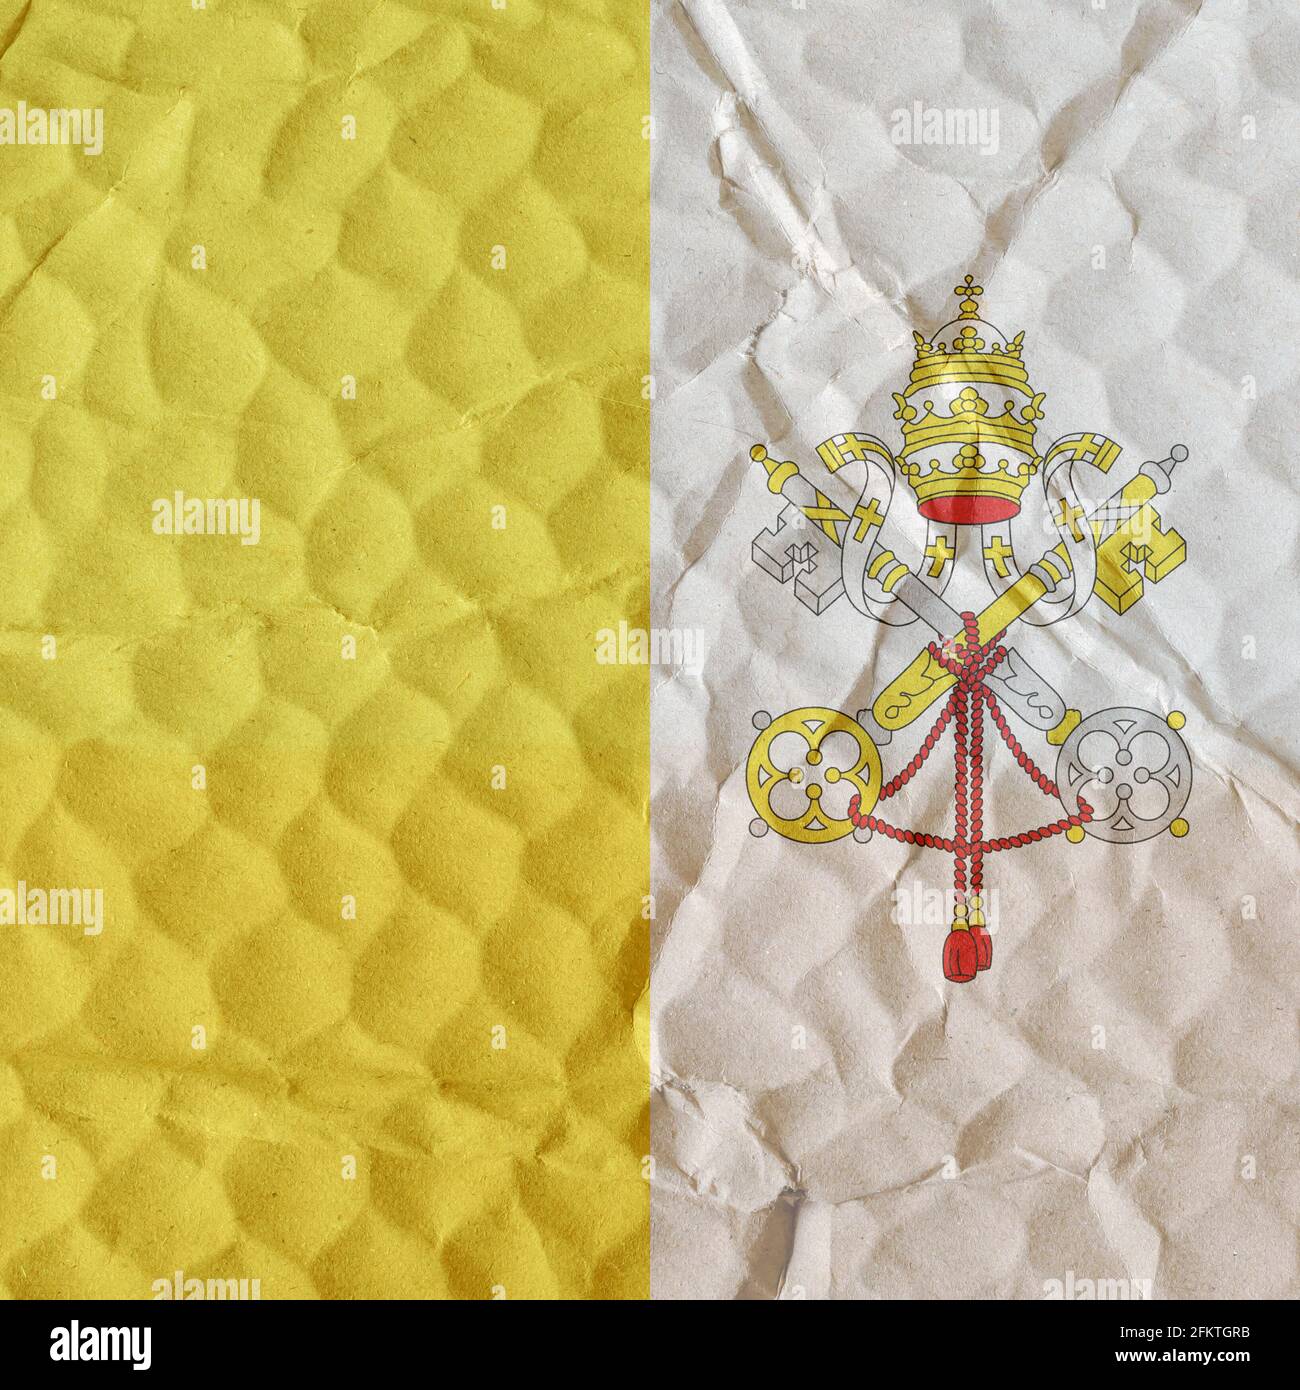 Yellow and white Vatican flag on an uneven textured surface. The concept of freedom, independence, supremacy of the church Stock Photo